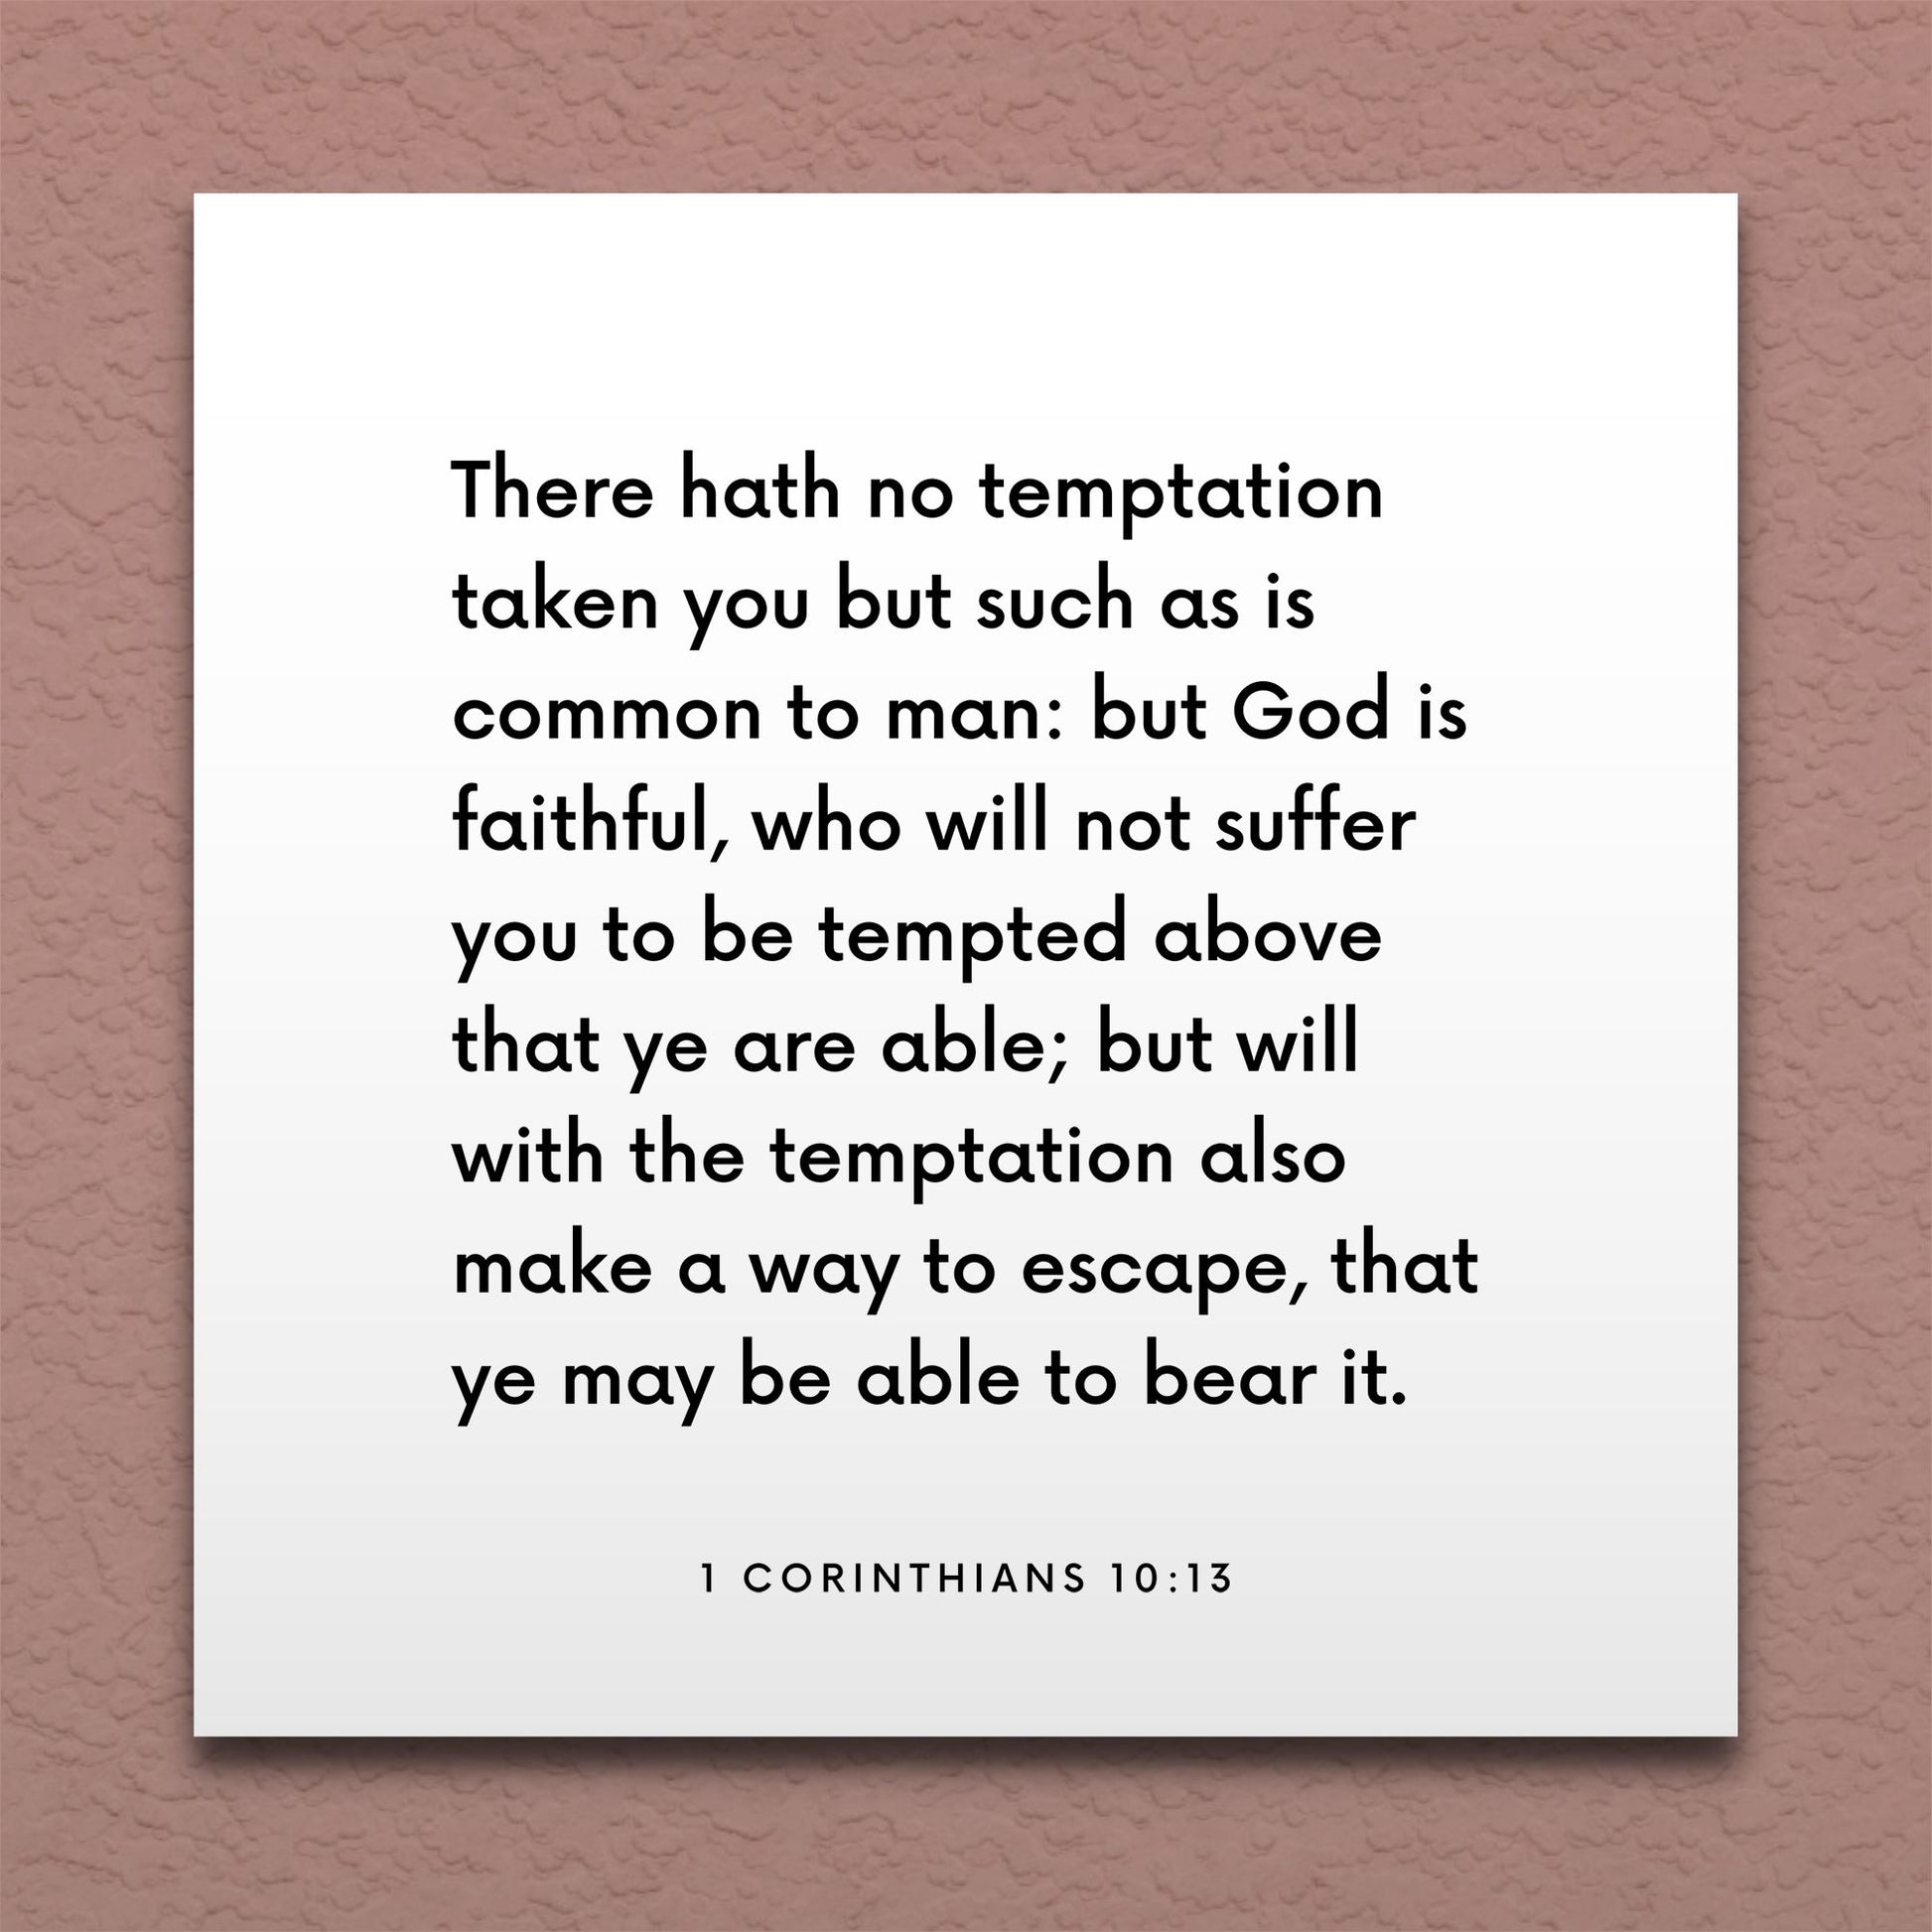 Wall-mounted scripture tile for 1 Corinthians 10:13 - "God will not suffer you to be tempted above that ye are able"